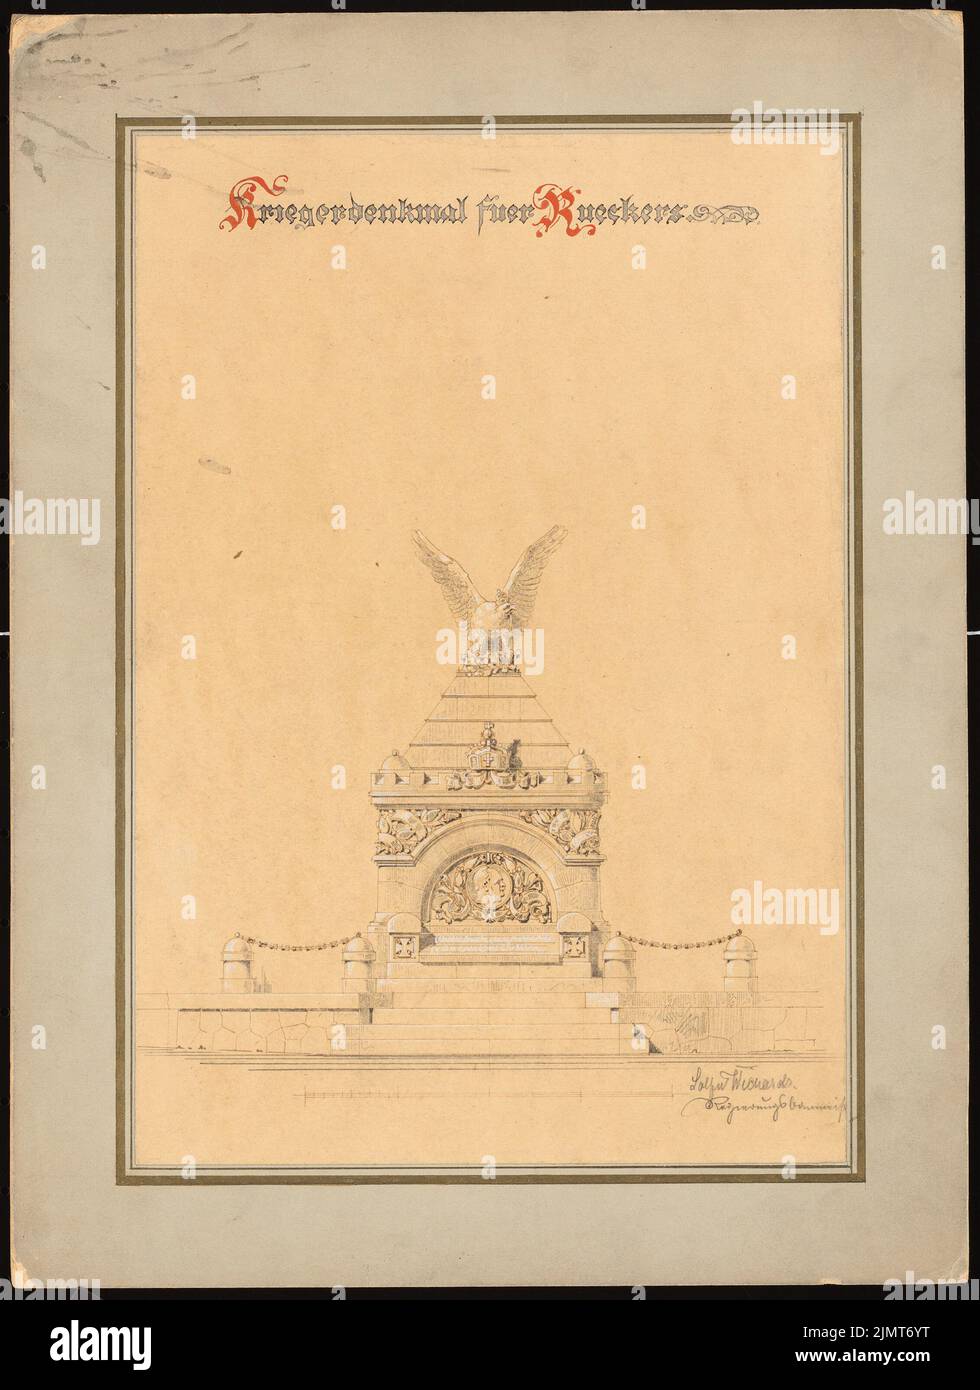 Solf & Wichards, war memorial in Rückers (without date): View. Ink, pencil white heighted on paper, 35.1 x 26.5 cm (including scan edges) Solf & Wichards : Kriegerdenkmal, Rückers Stock Photo